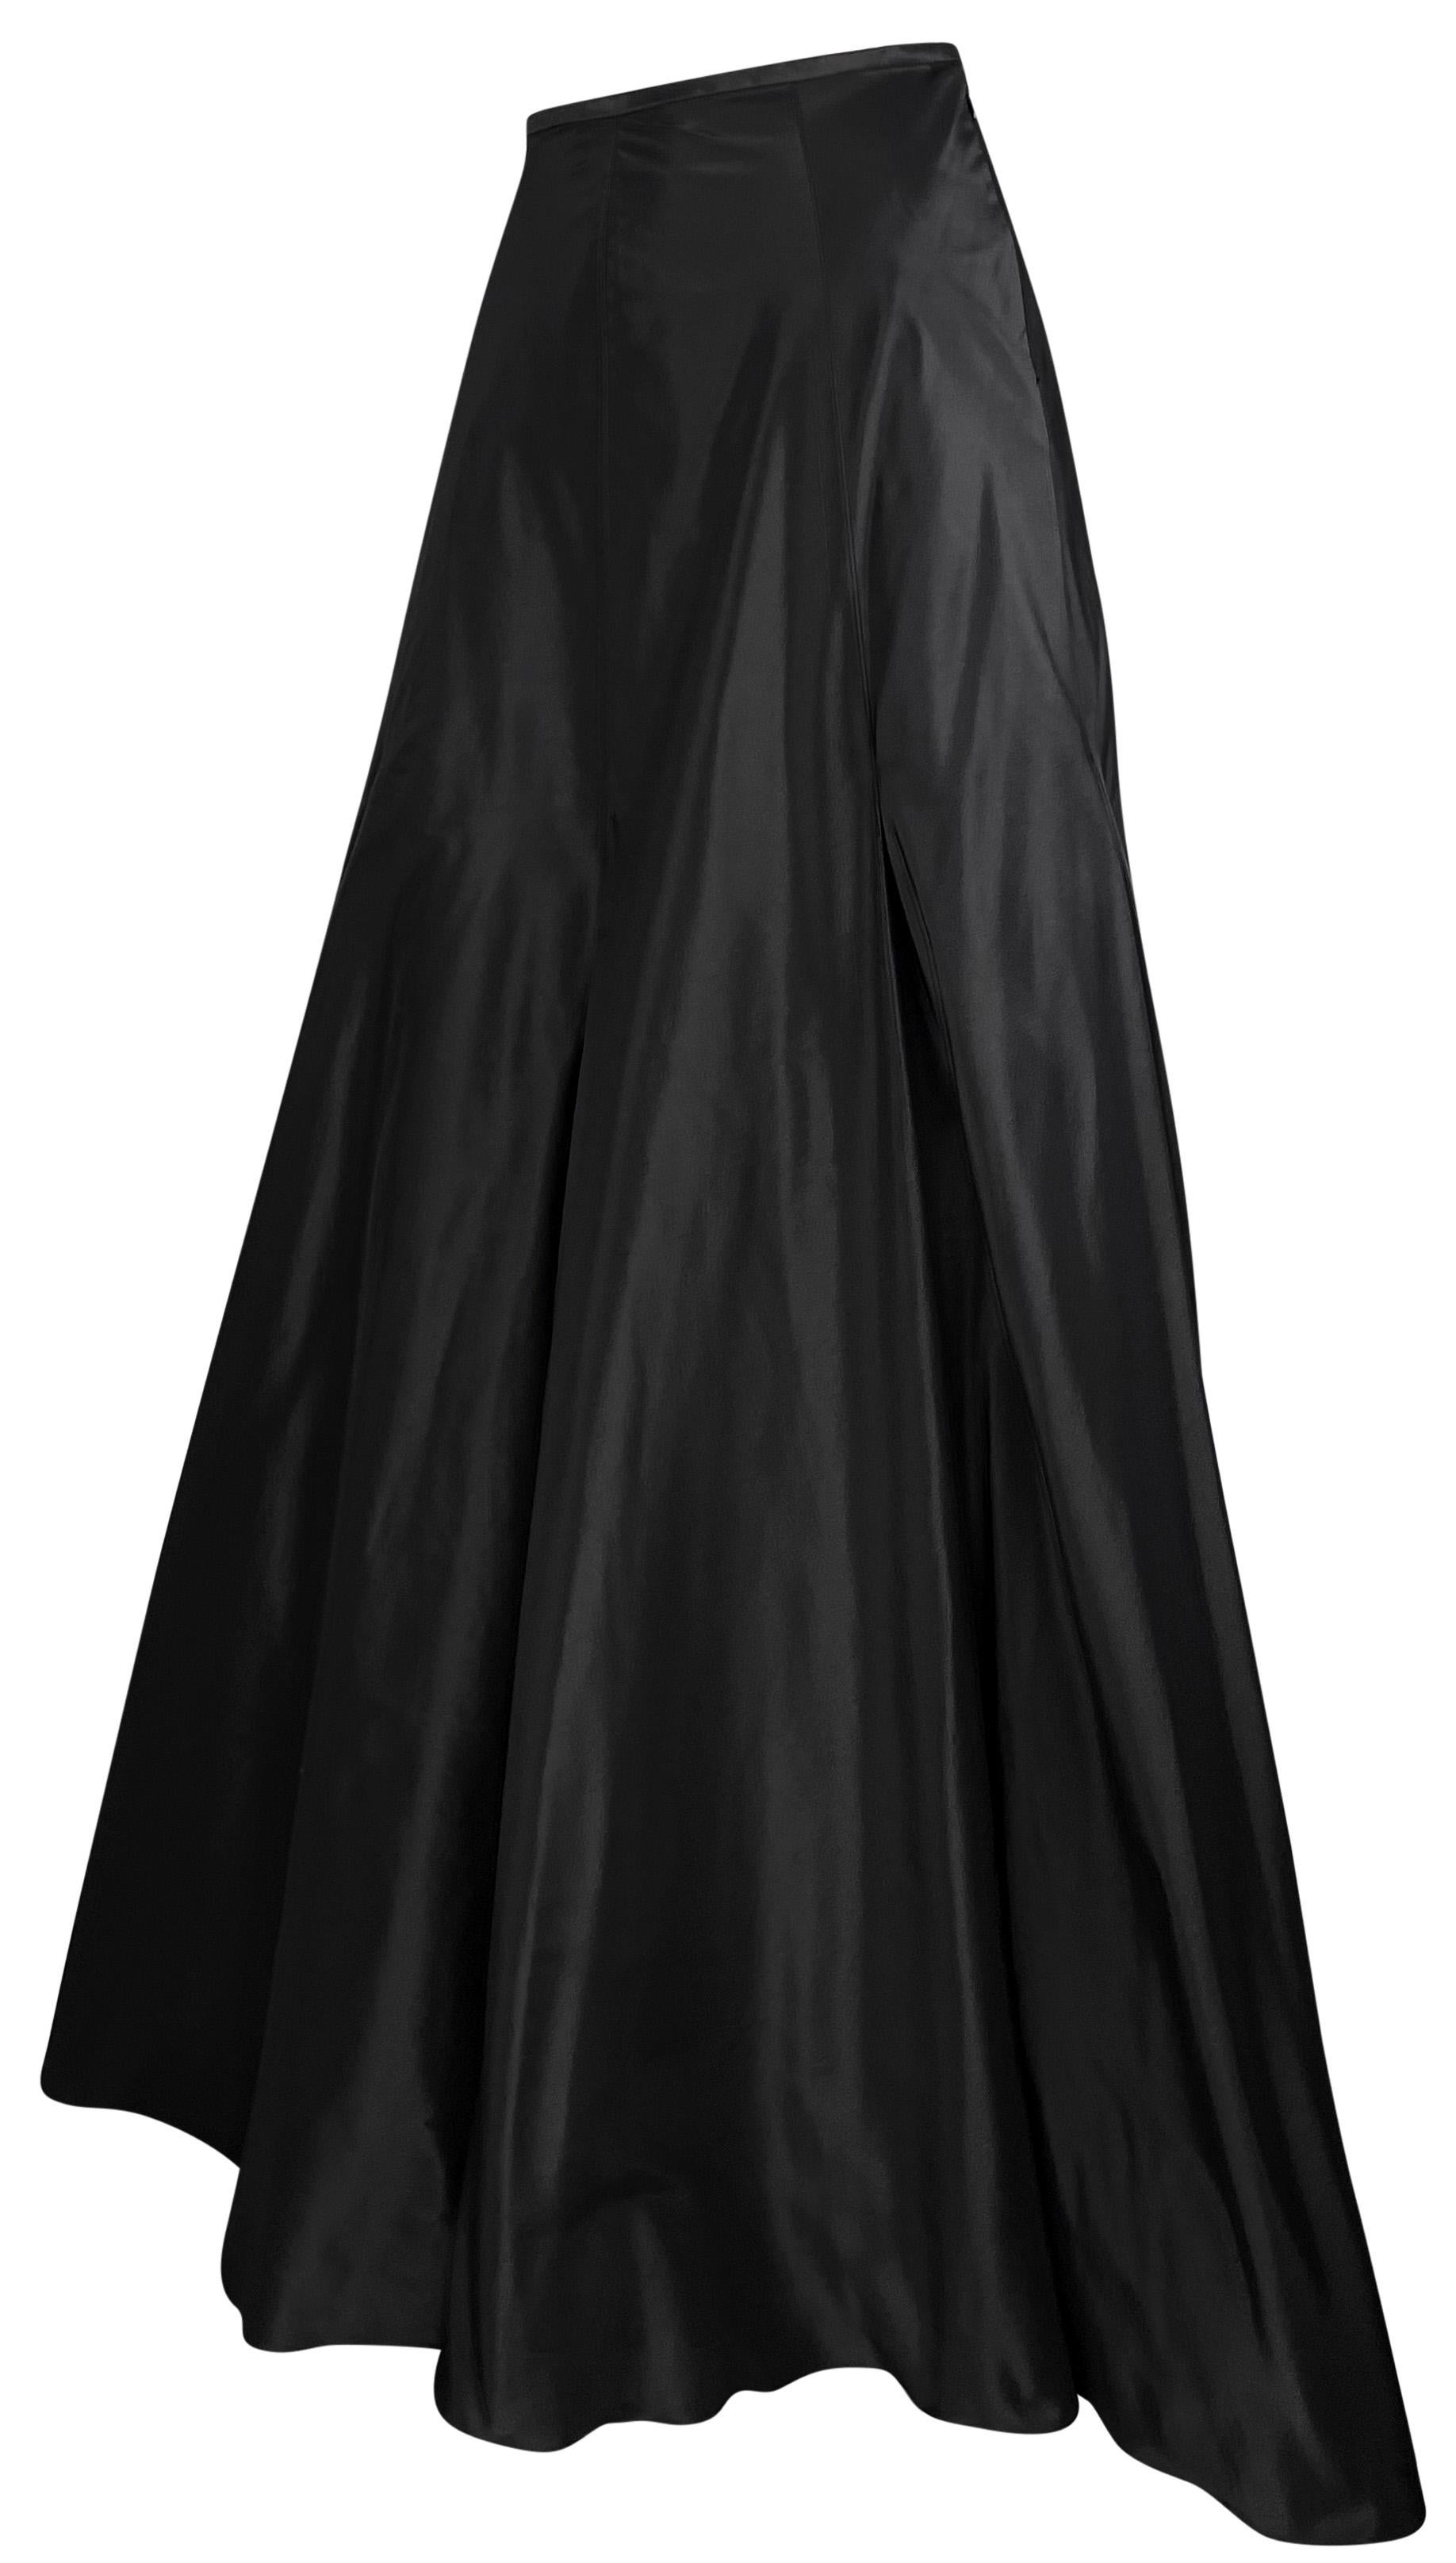 From the late 1990s, this black Ralph Lauren Purple Label evening skirt is a classically beautiful addition to any wardrobe. This high-waisted skirt is constructed entirely of silk taffeta and features an A-line cut. Perfect for your next black tie